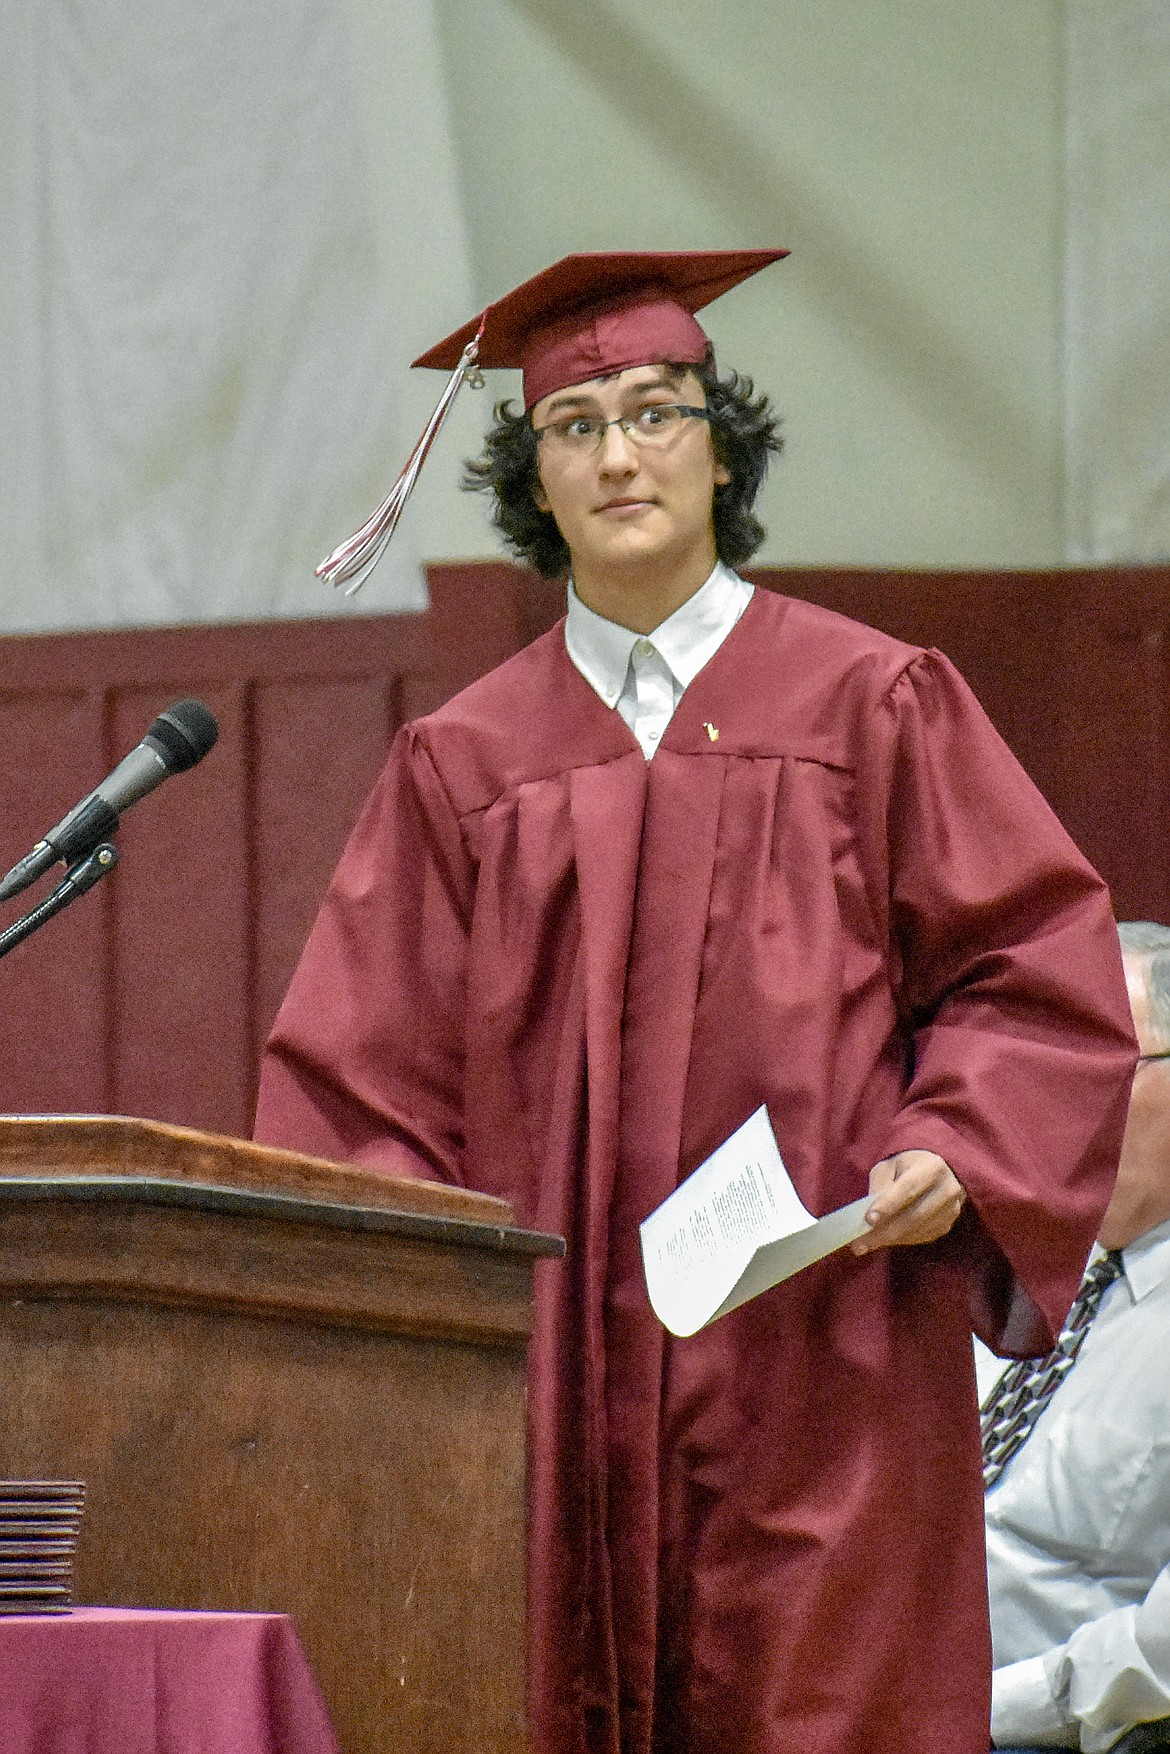 Troy high School graduate Liam Hennsley hammed things up a little before introducing honorary speaker and Troy High School teacher Cory Anderson, at Troy&#146;s graduation ceremony on Saturday, June 2, 2018. (Ben Kibbey/The Western News)